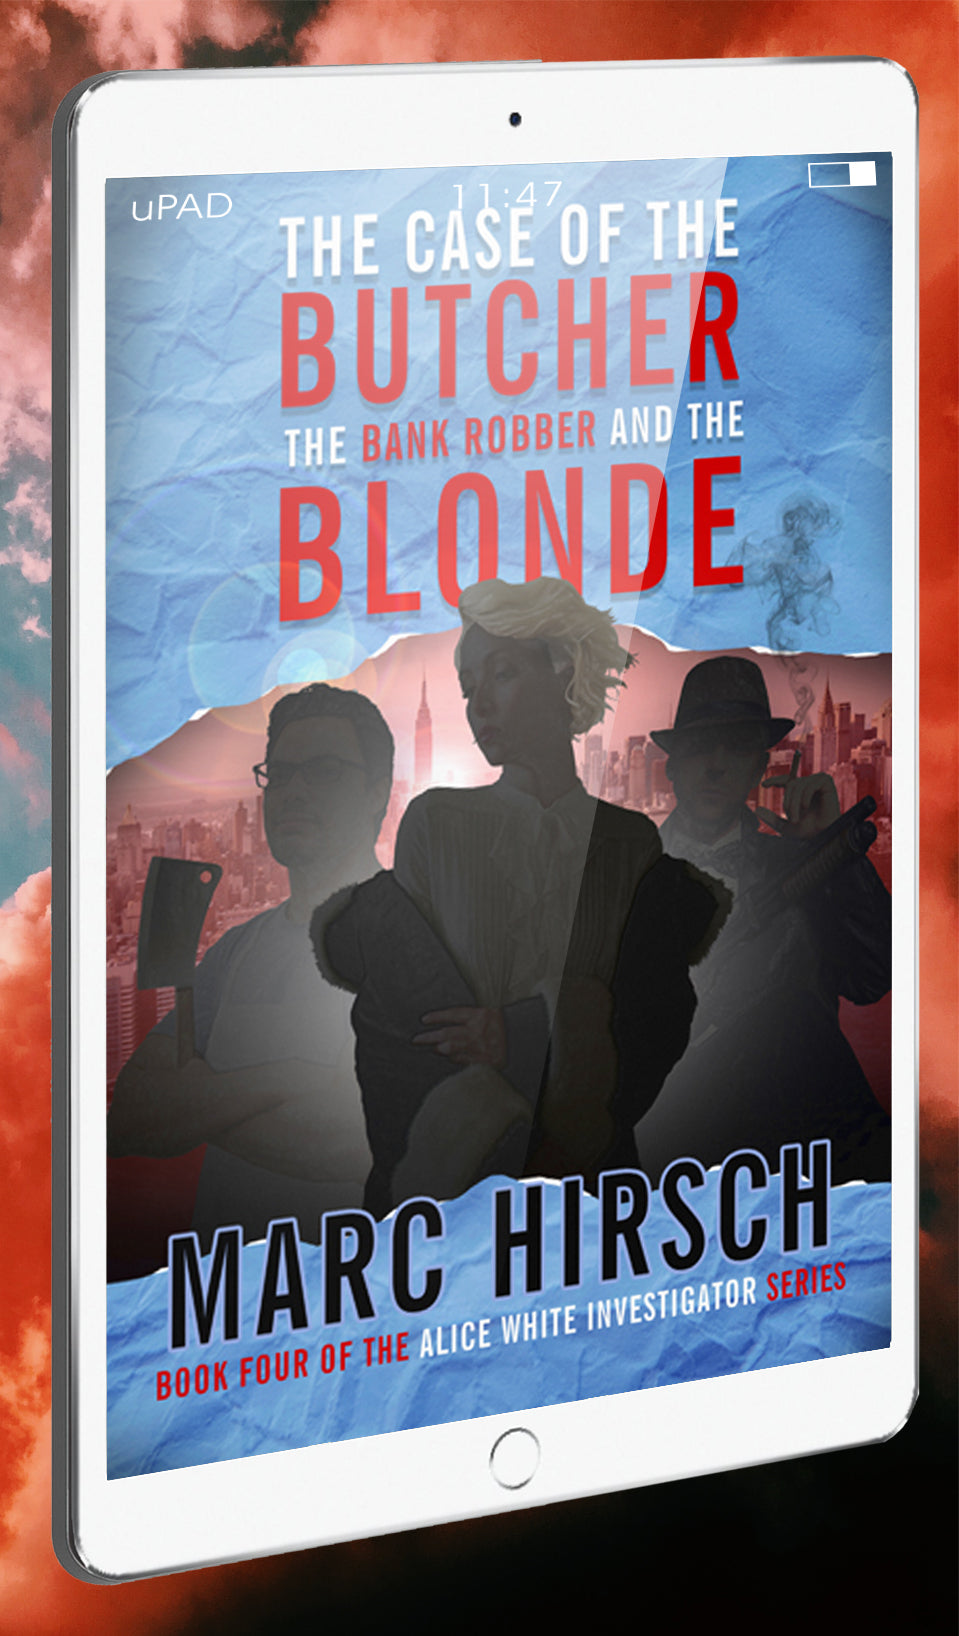 The Case Of The Butcher, The Bank Robber, And The Blonde eBook: Alice White Investigator Series Book 4